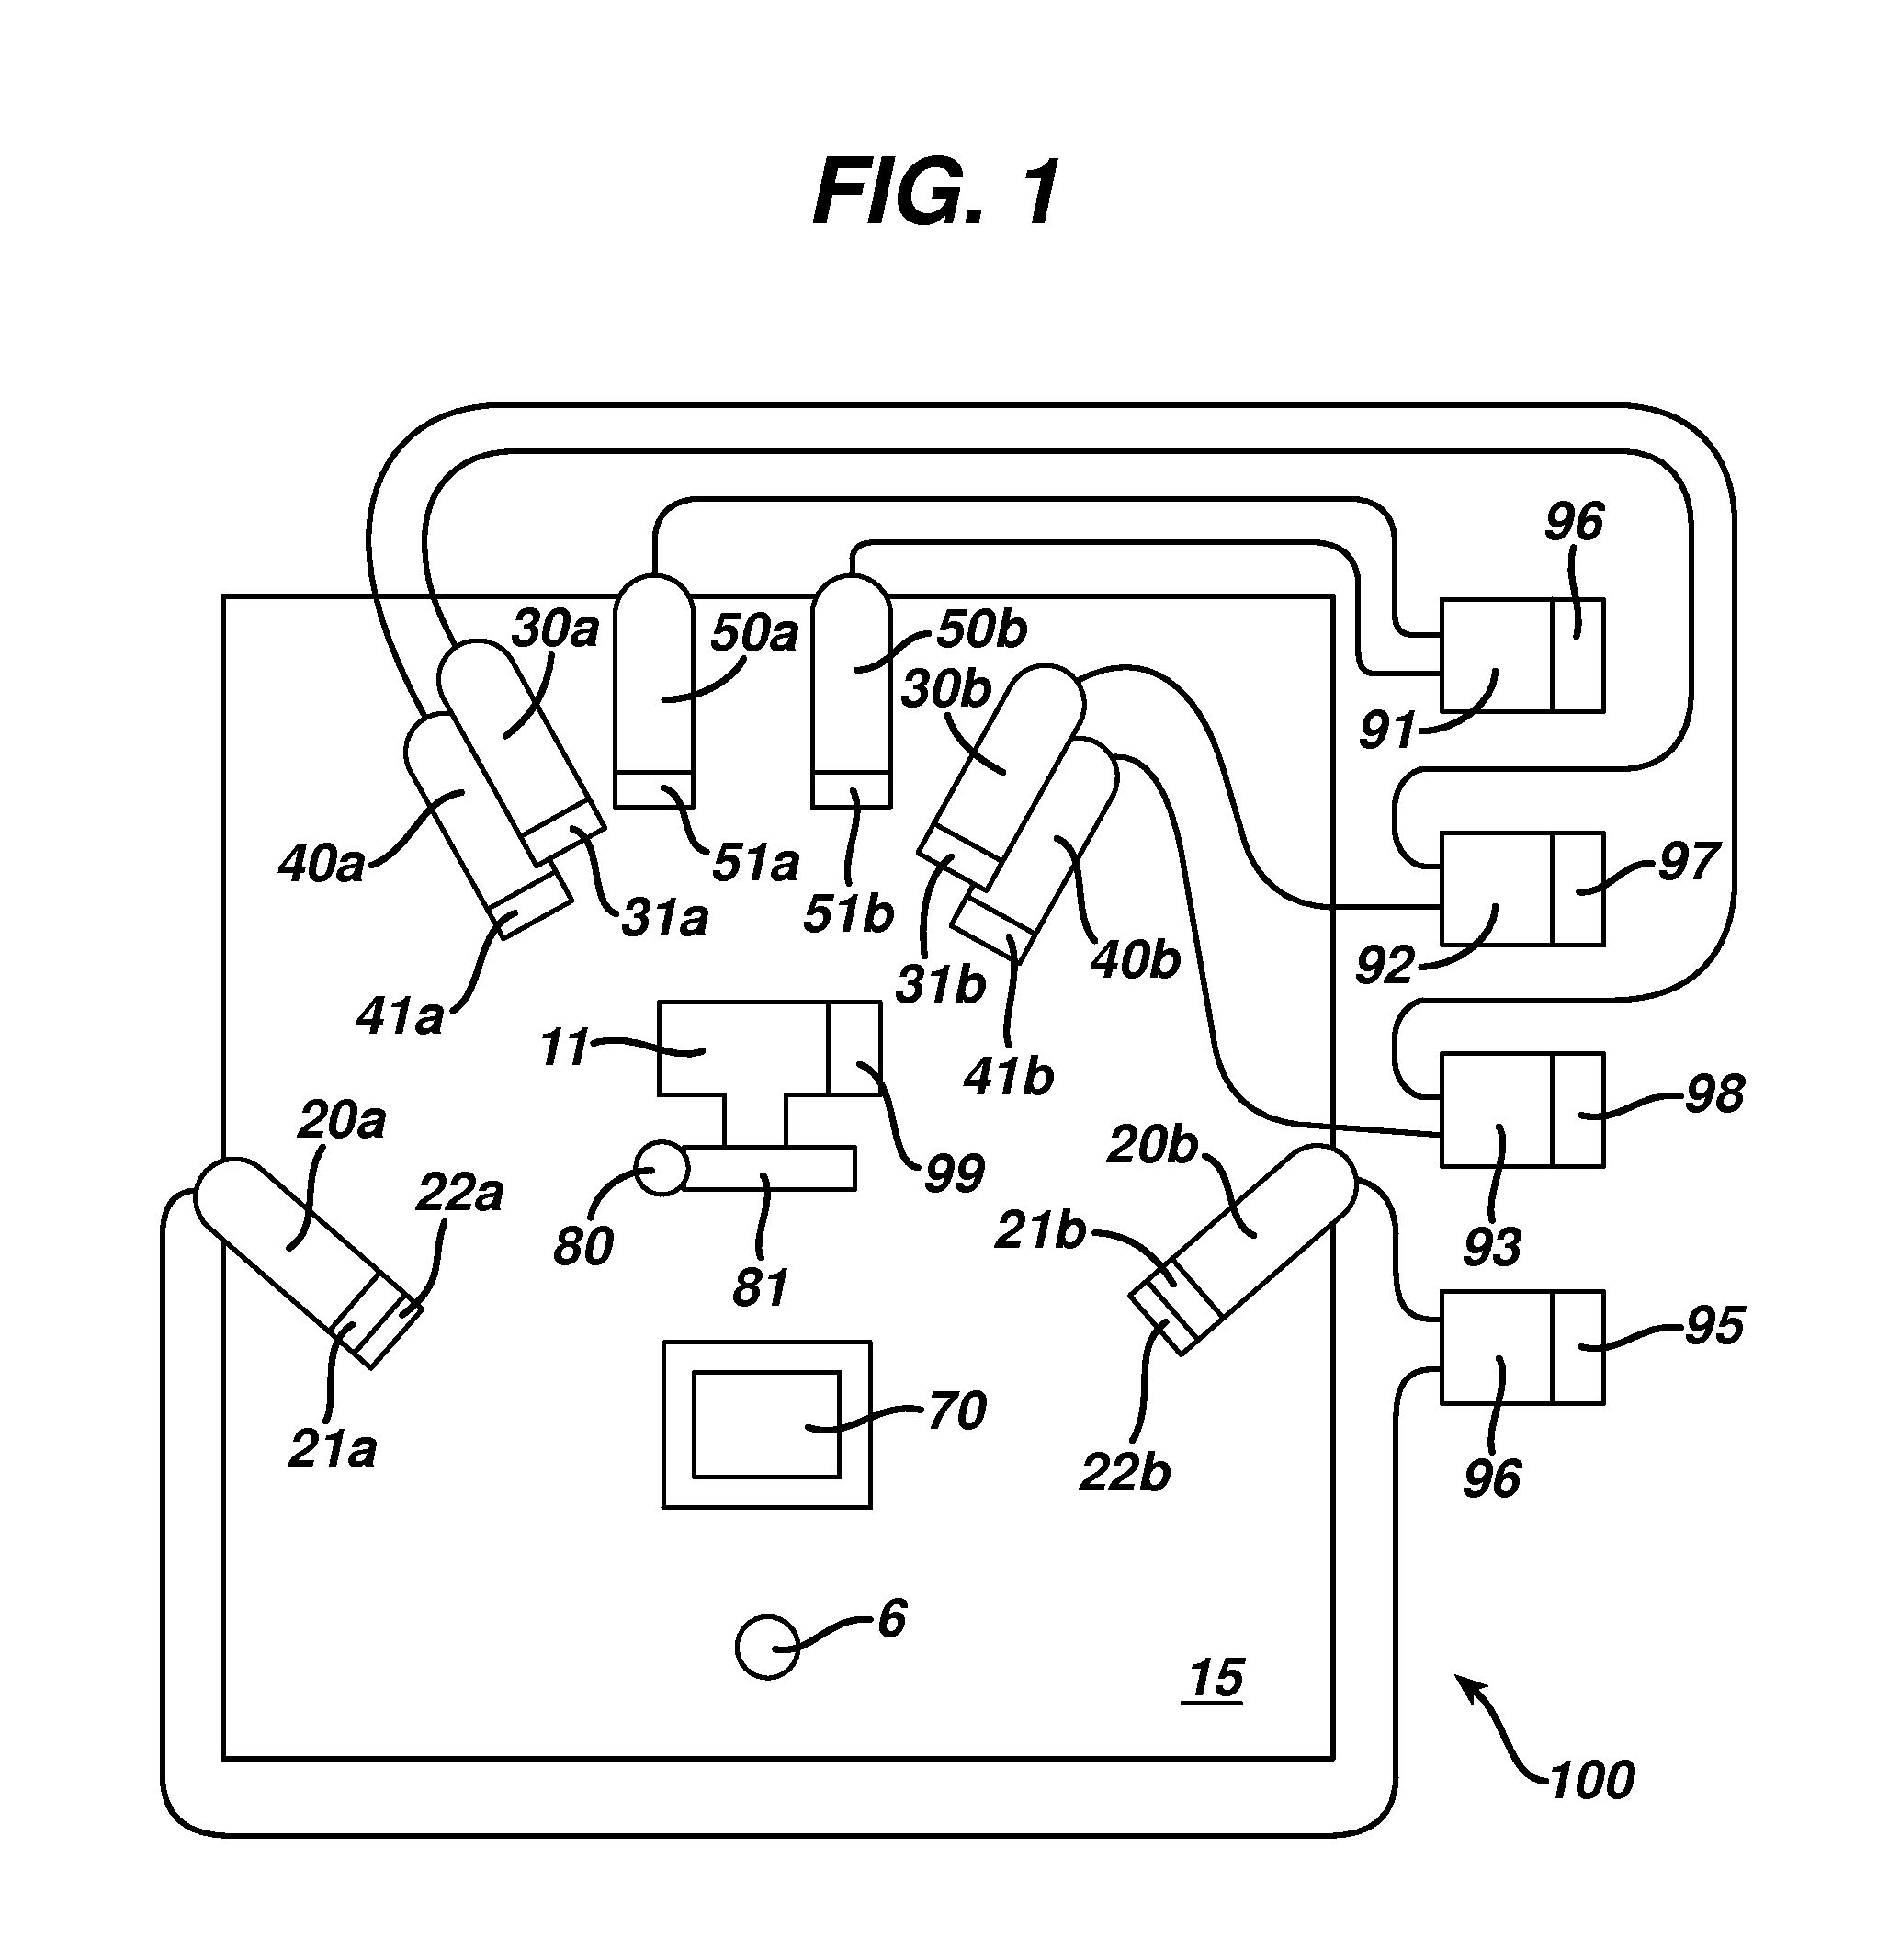 Skin imaging system with probe